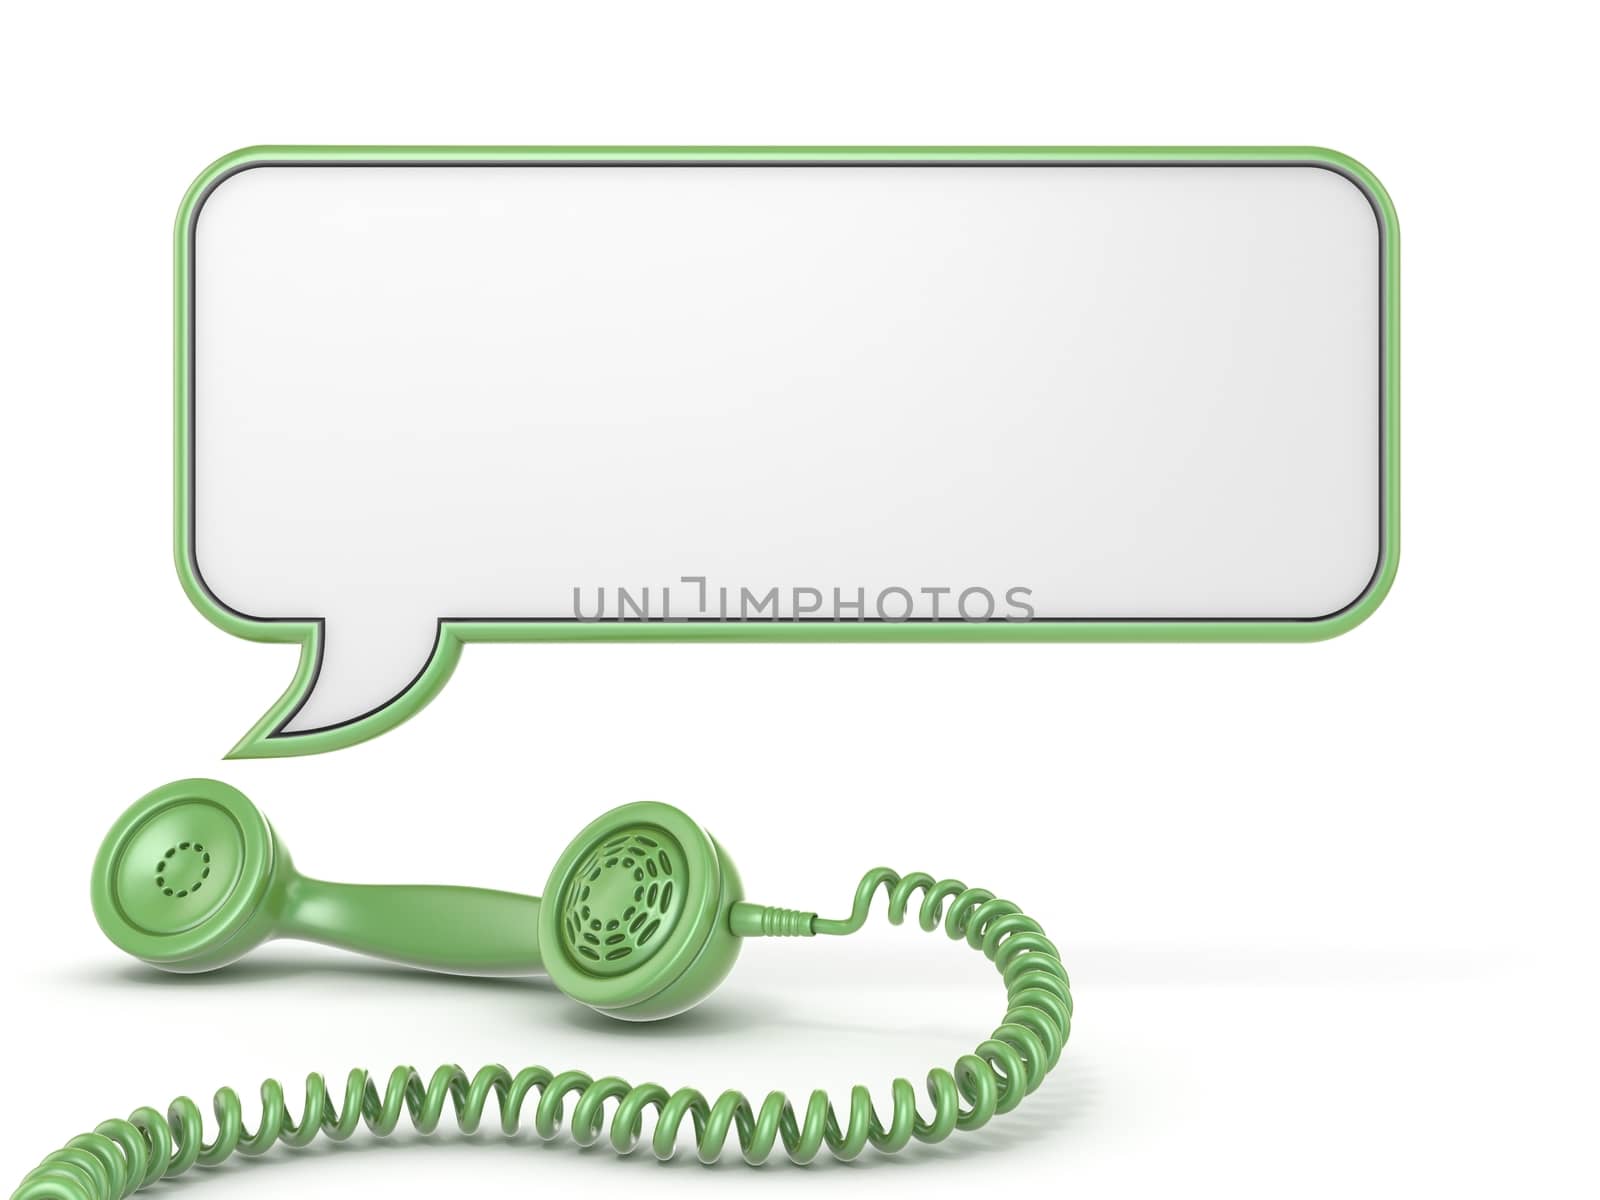 Green telephone handset and speech bubble 3D render illustration isolated on white background